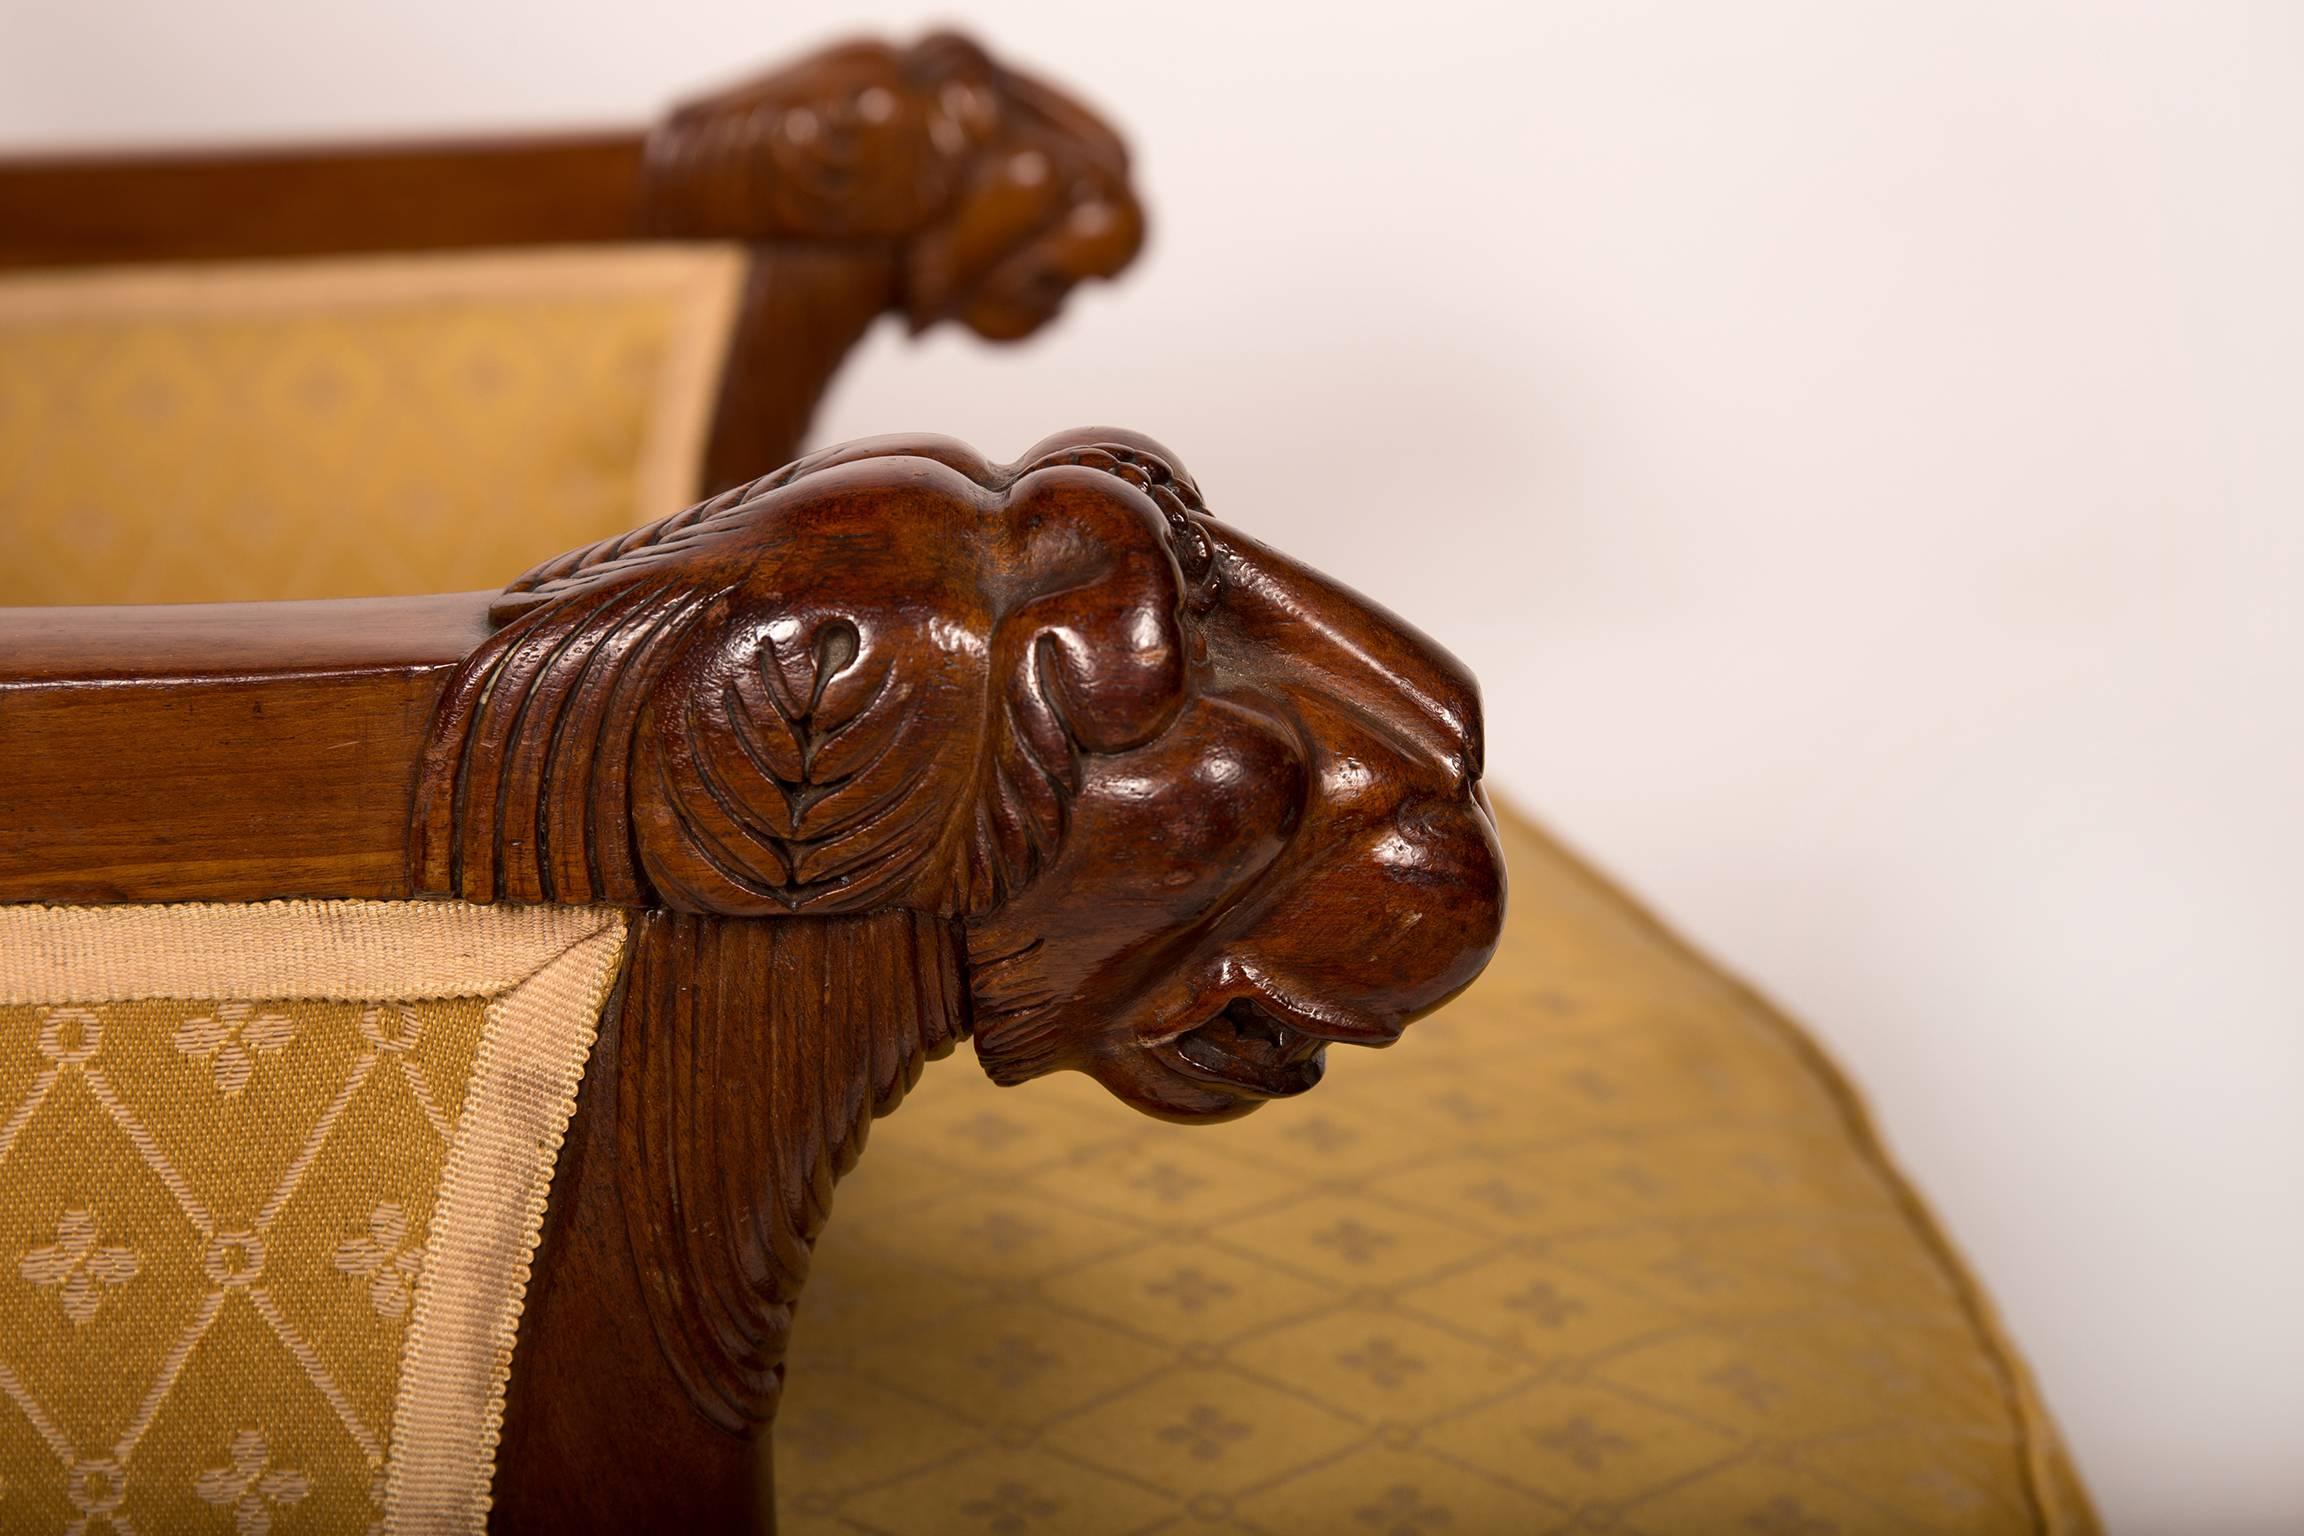 19th Century French Mahogany Bergere, Époque Consulat, Early Empire Period, circa 1799-1804 For Sale